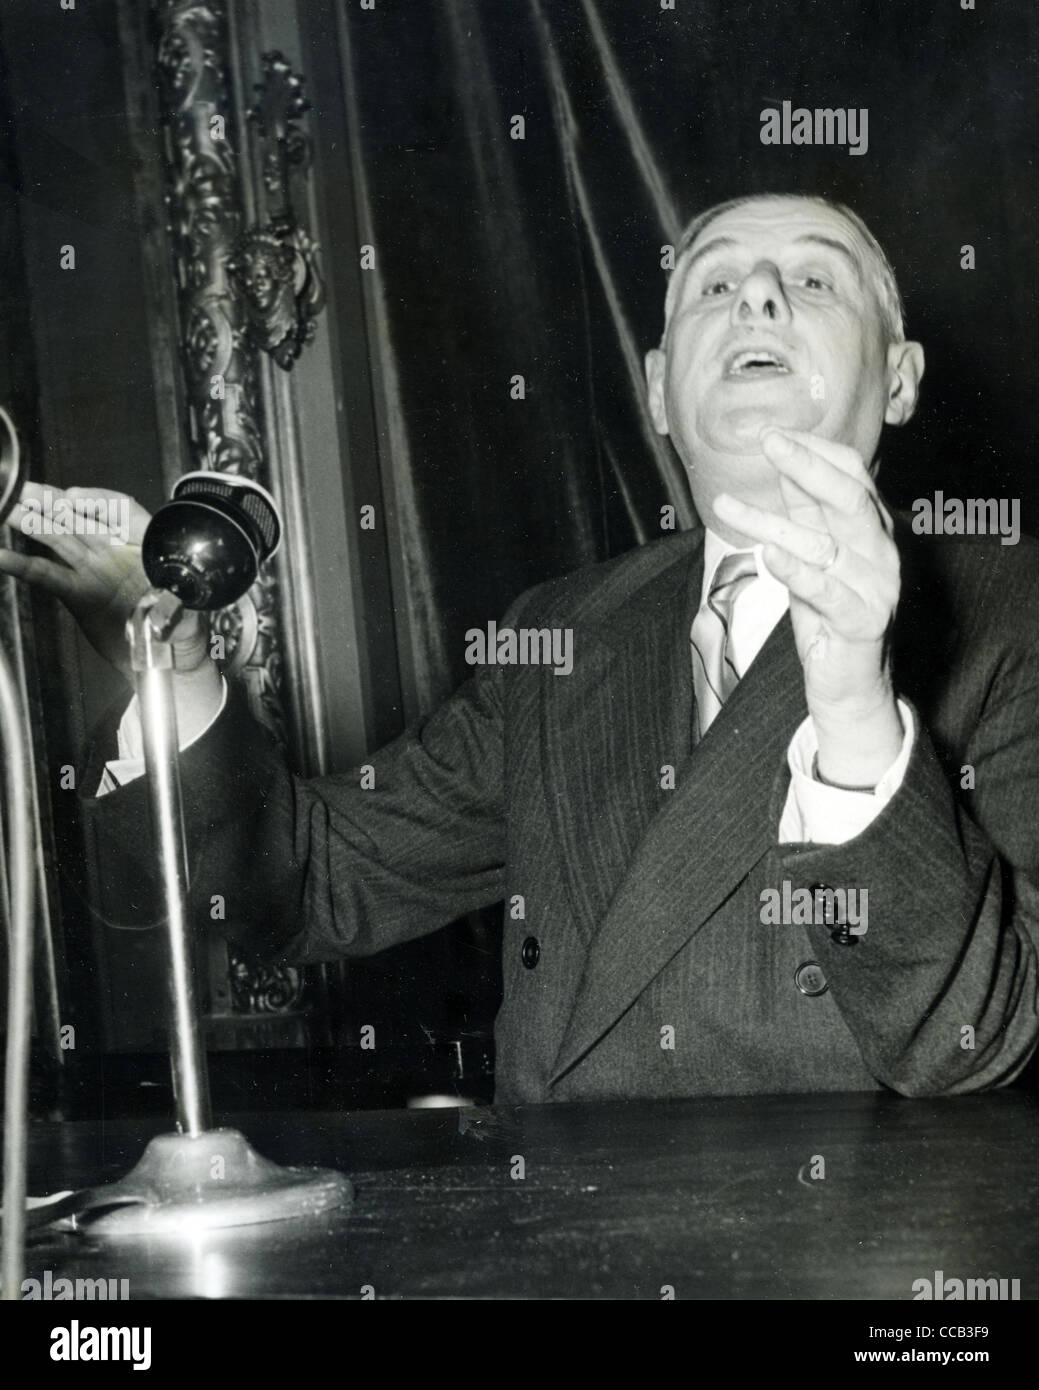 CHARLES DE GAULLE (1890-1970) French statesman making a speech about the Common Market about 1958 Stock Photo